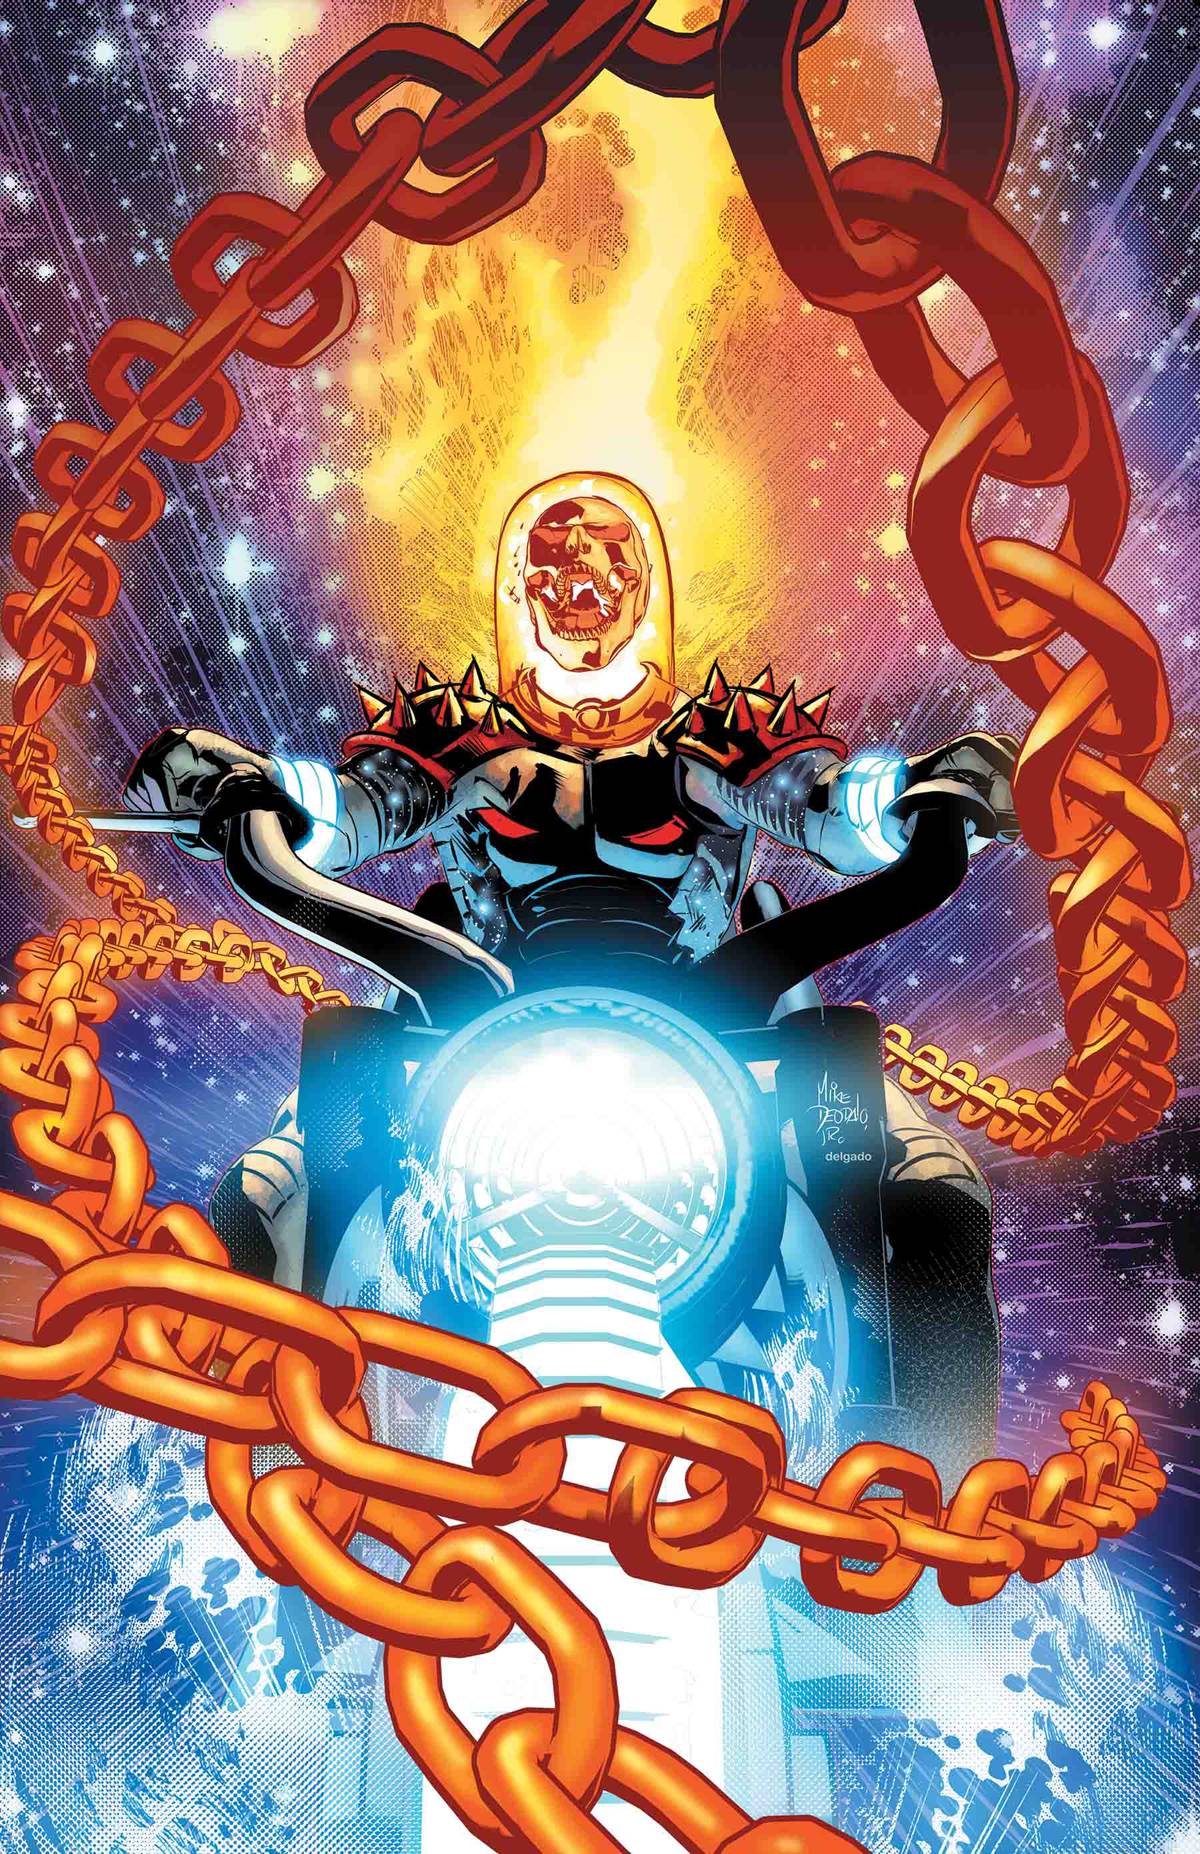 COSMIC GHOST RIDER #1 (OF 5) DEODATO VARIANT